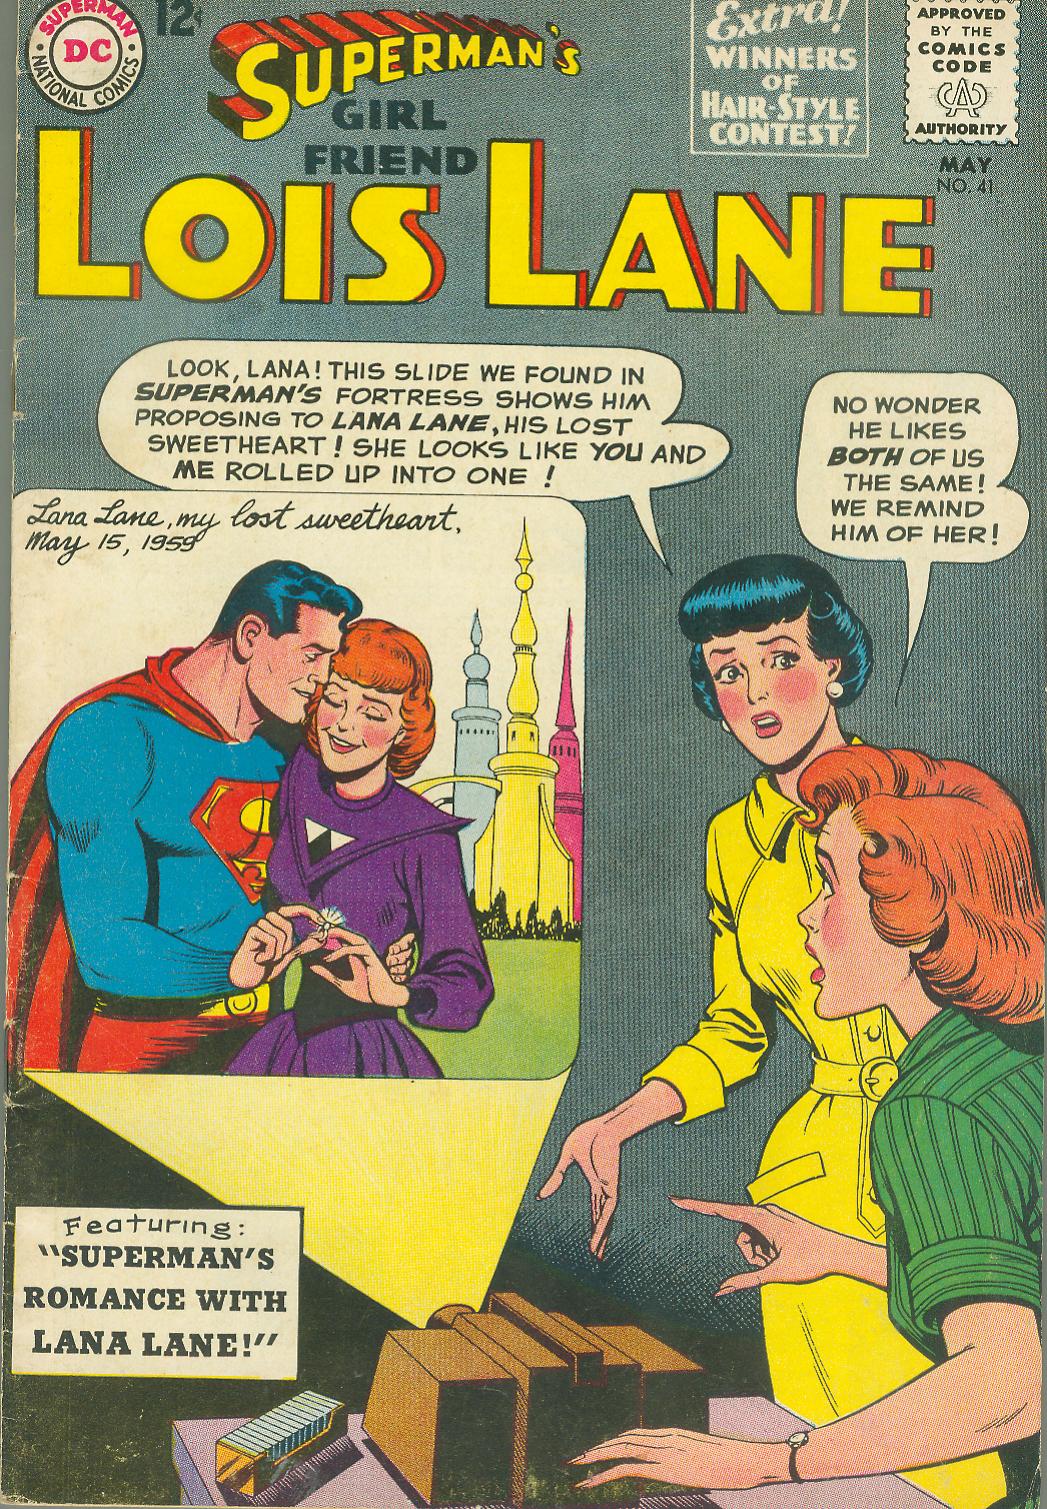 Superman's Girl Friend, Lois Lane issue 41 - Page 1